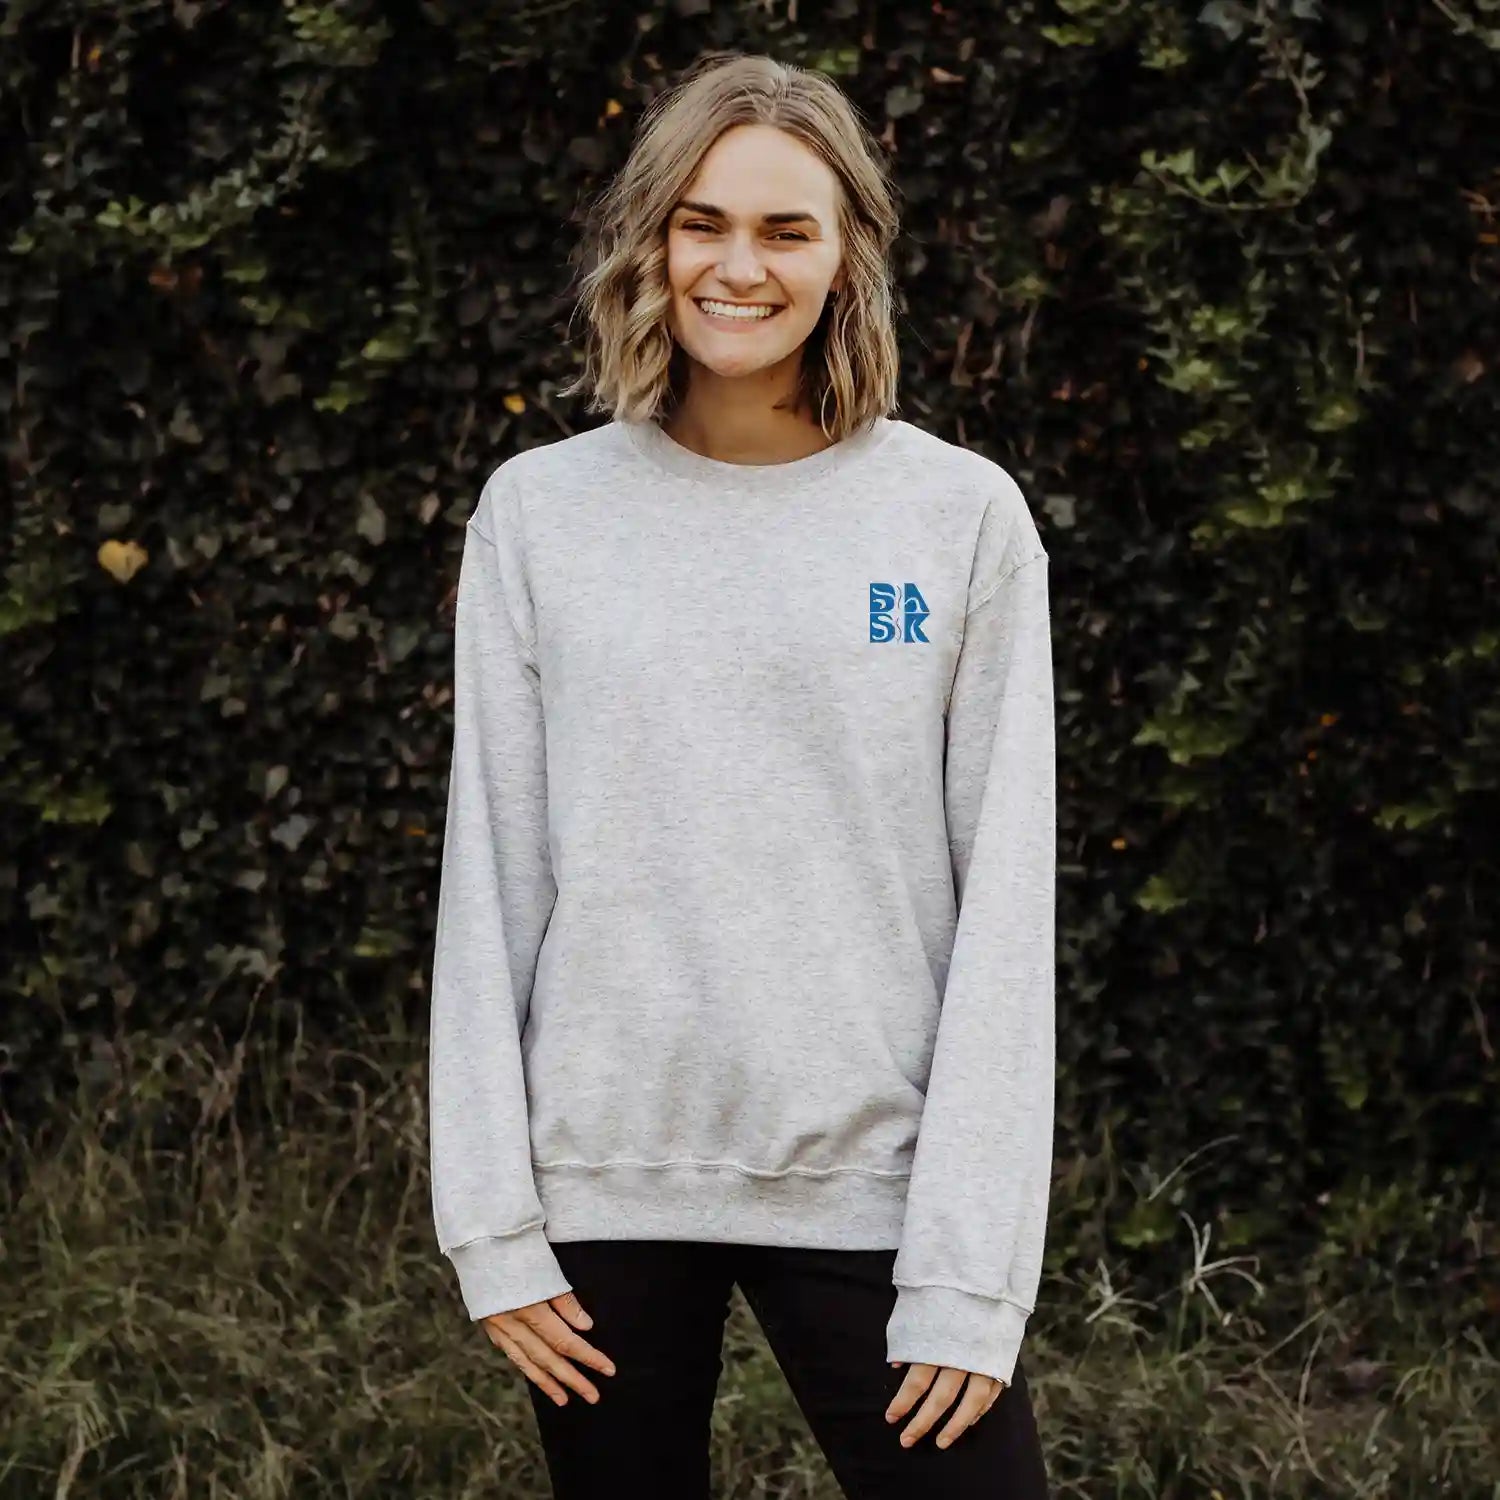 A woman wearing a grey Kupa'a Tide Sweatshirt with the Be Still and Know logo on it.